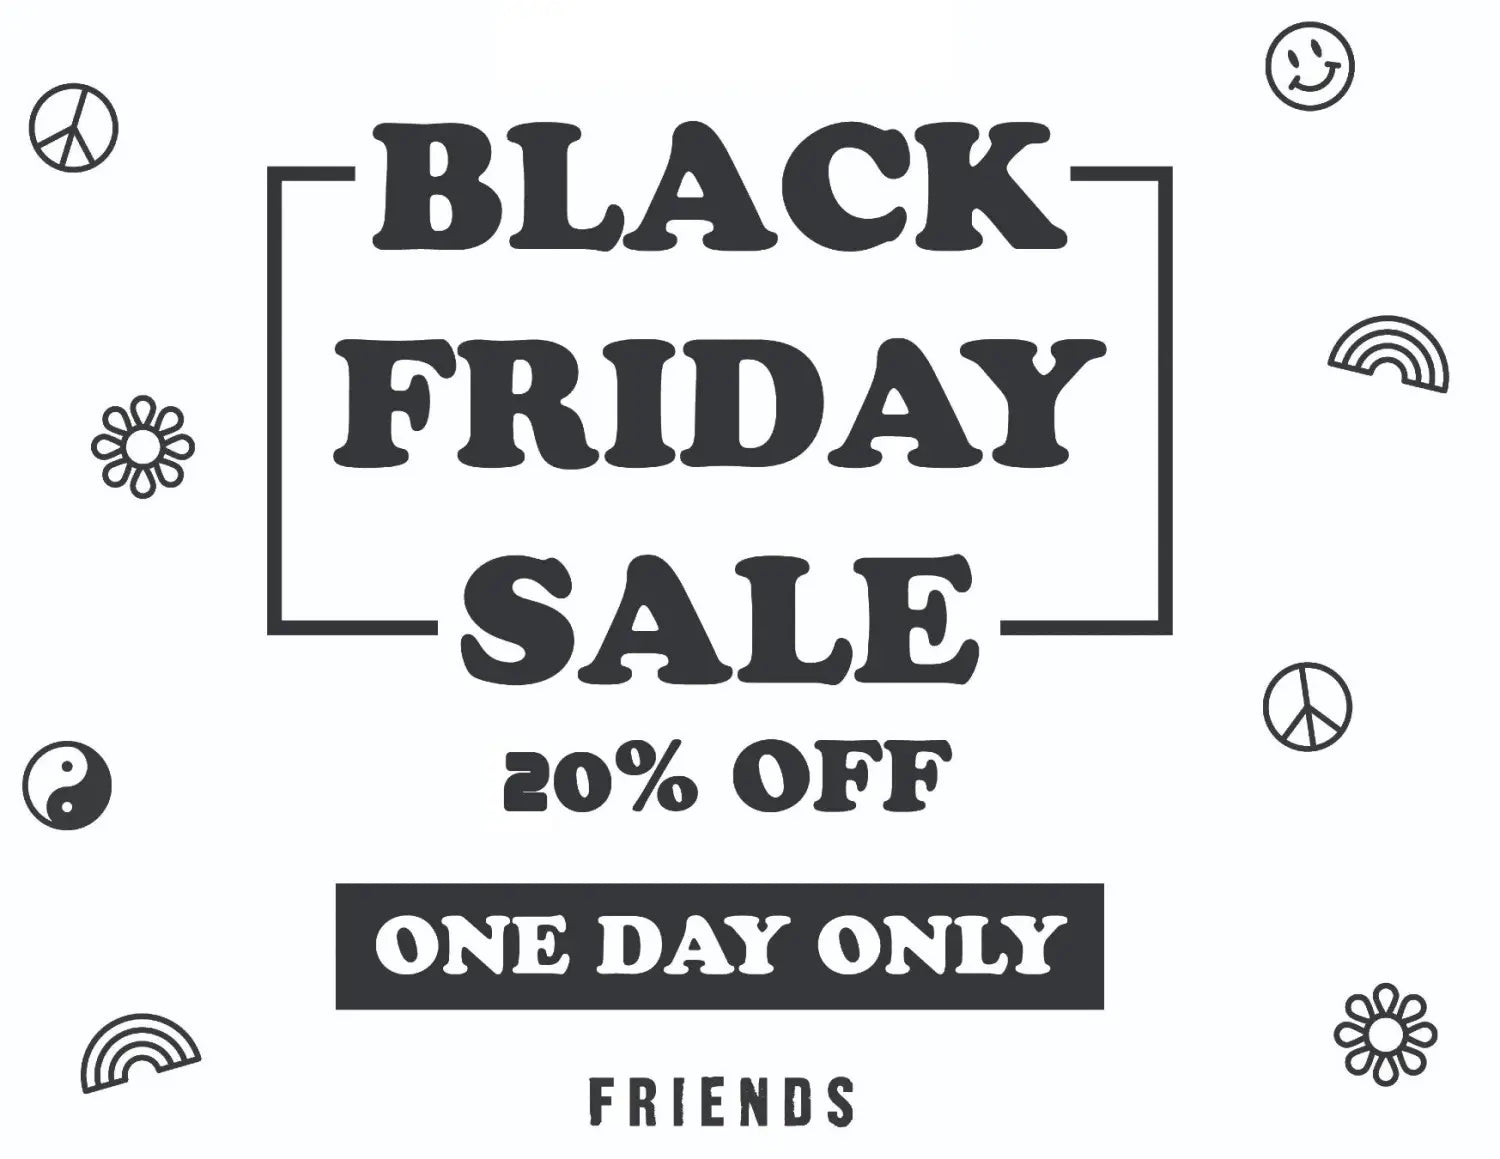 Black Friday Sale and Deals at Friends NYC in Brooklyn, NY